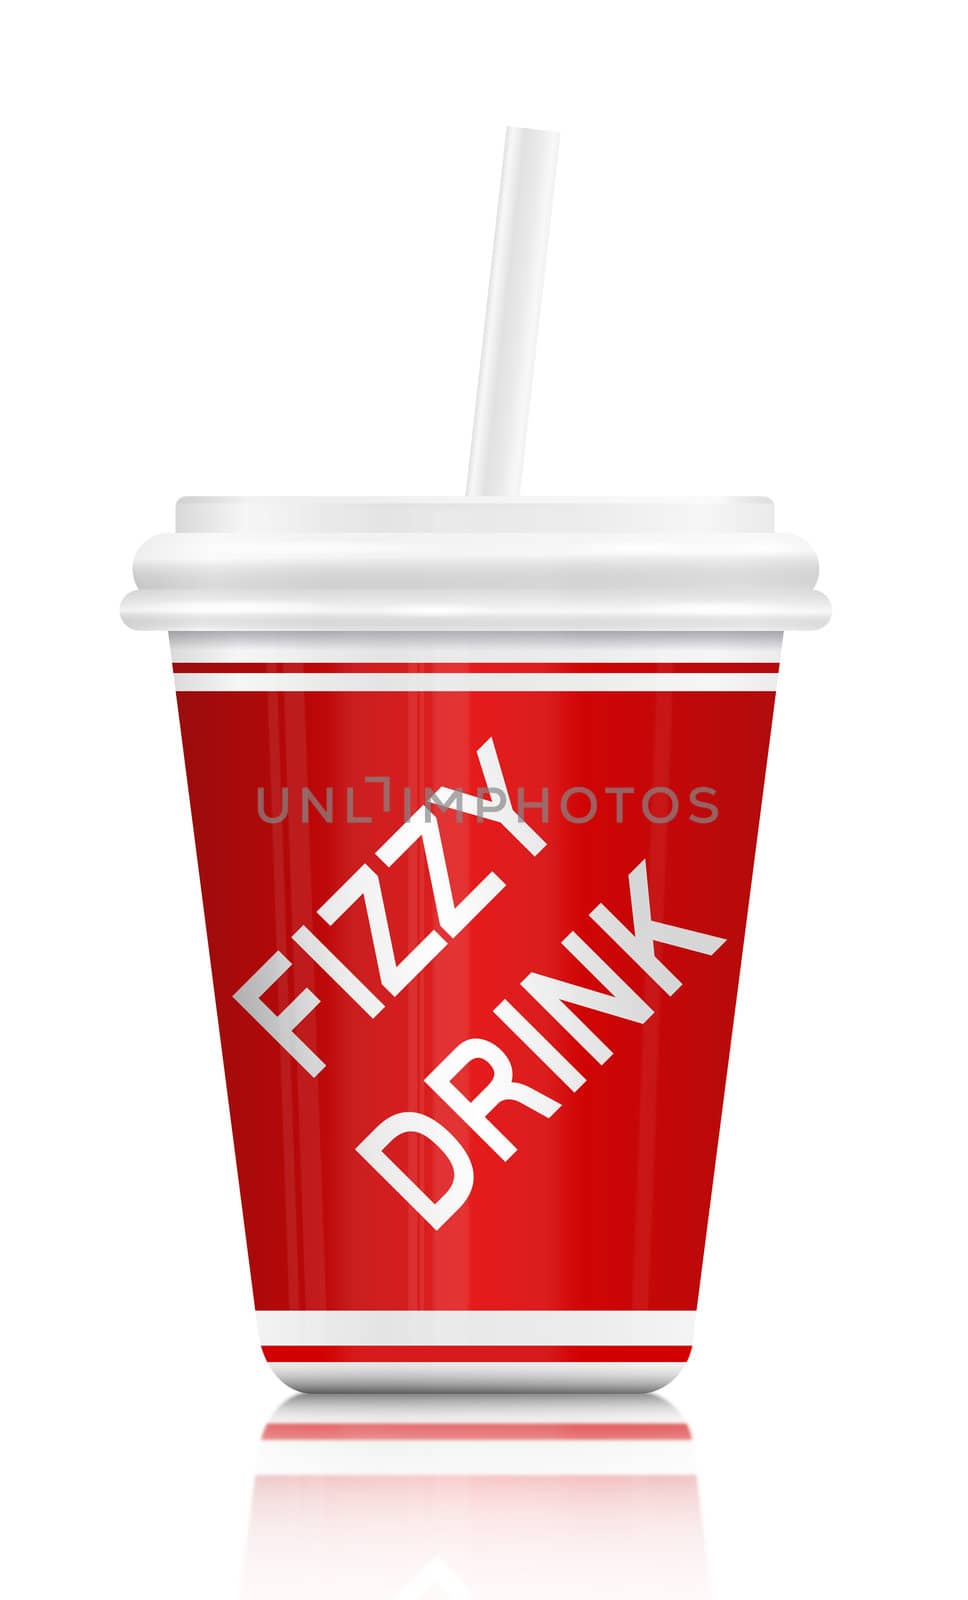 Illustration depicting a single plastic fizzy drink container with straw. White background.